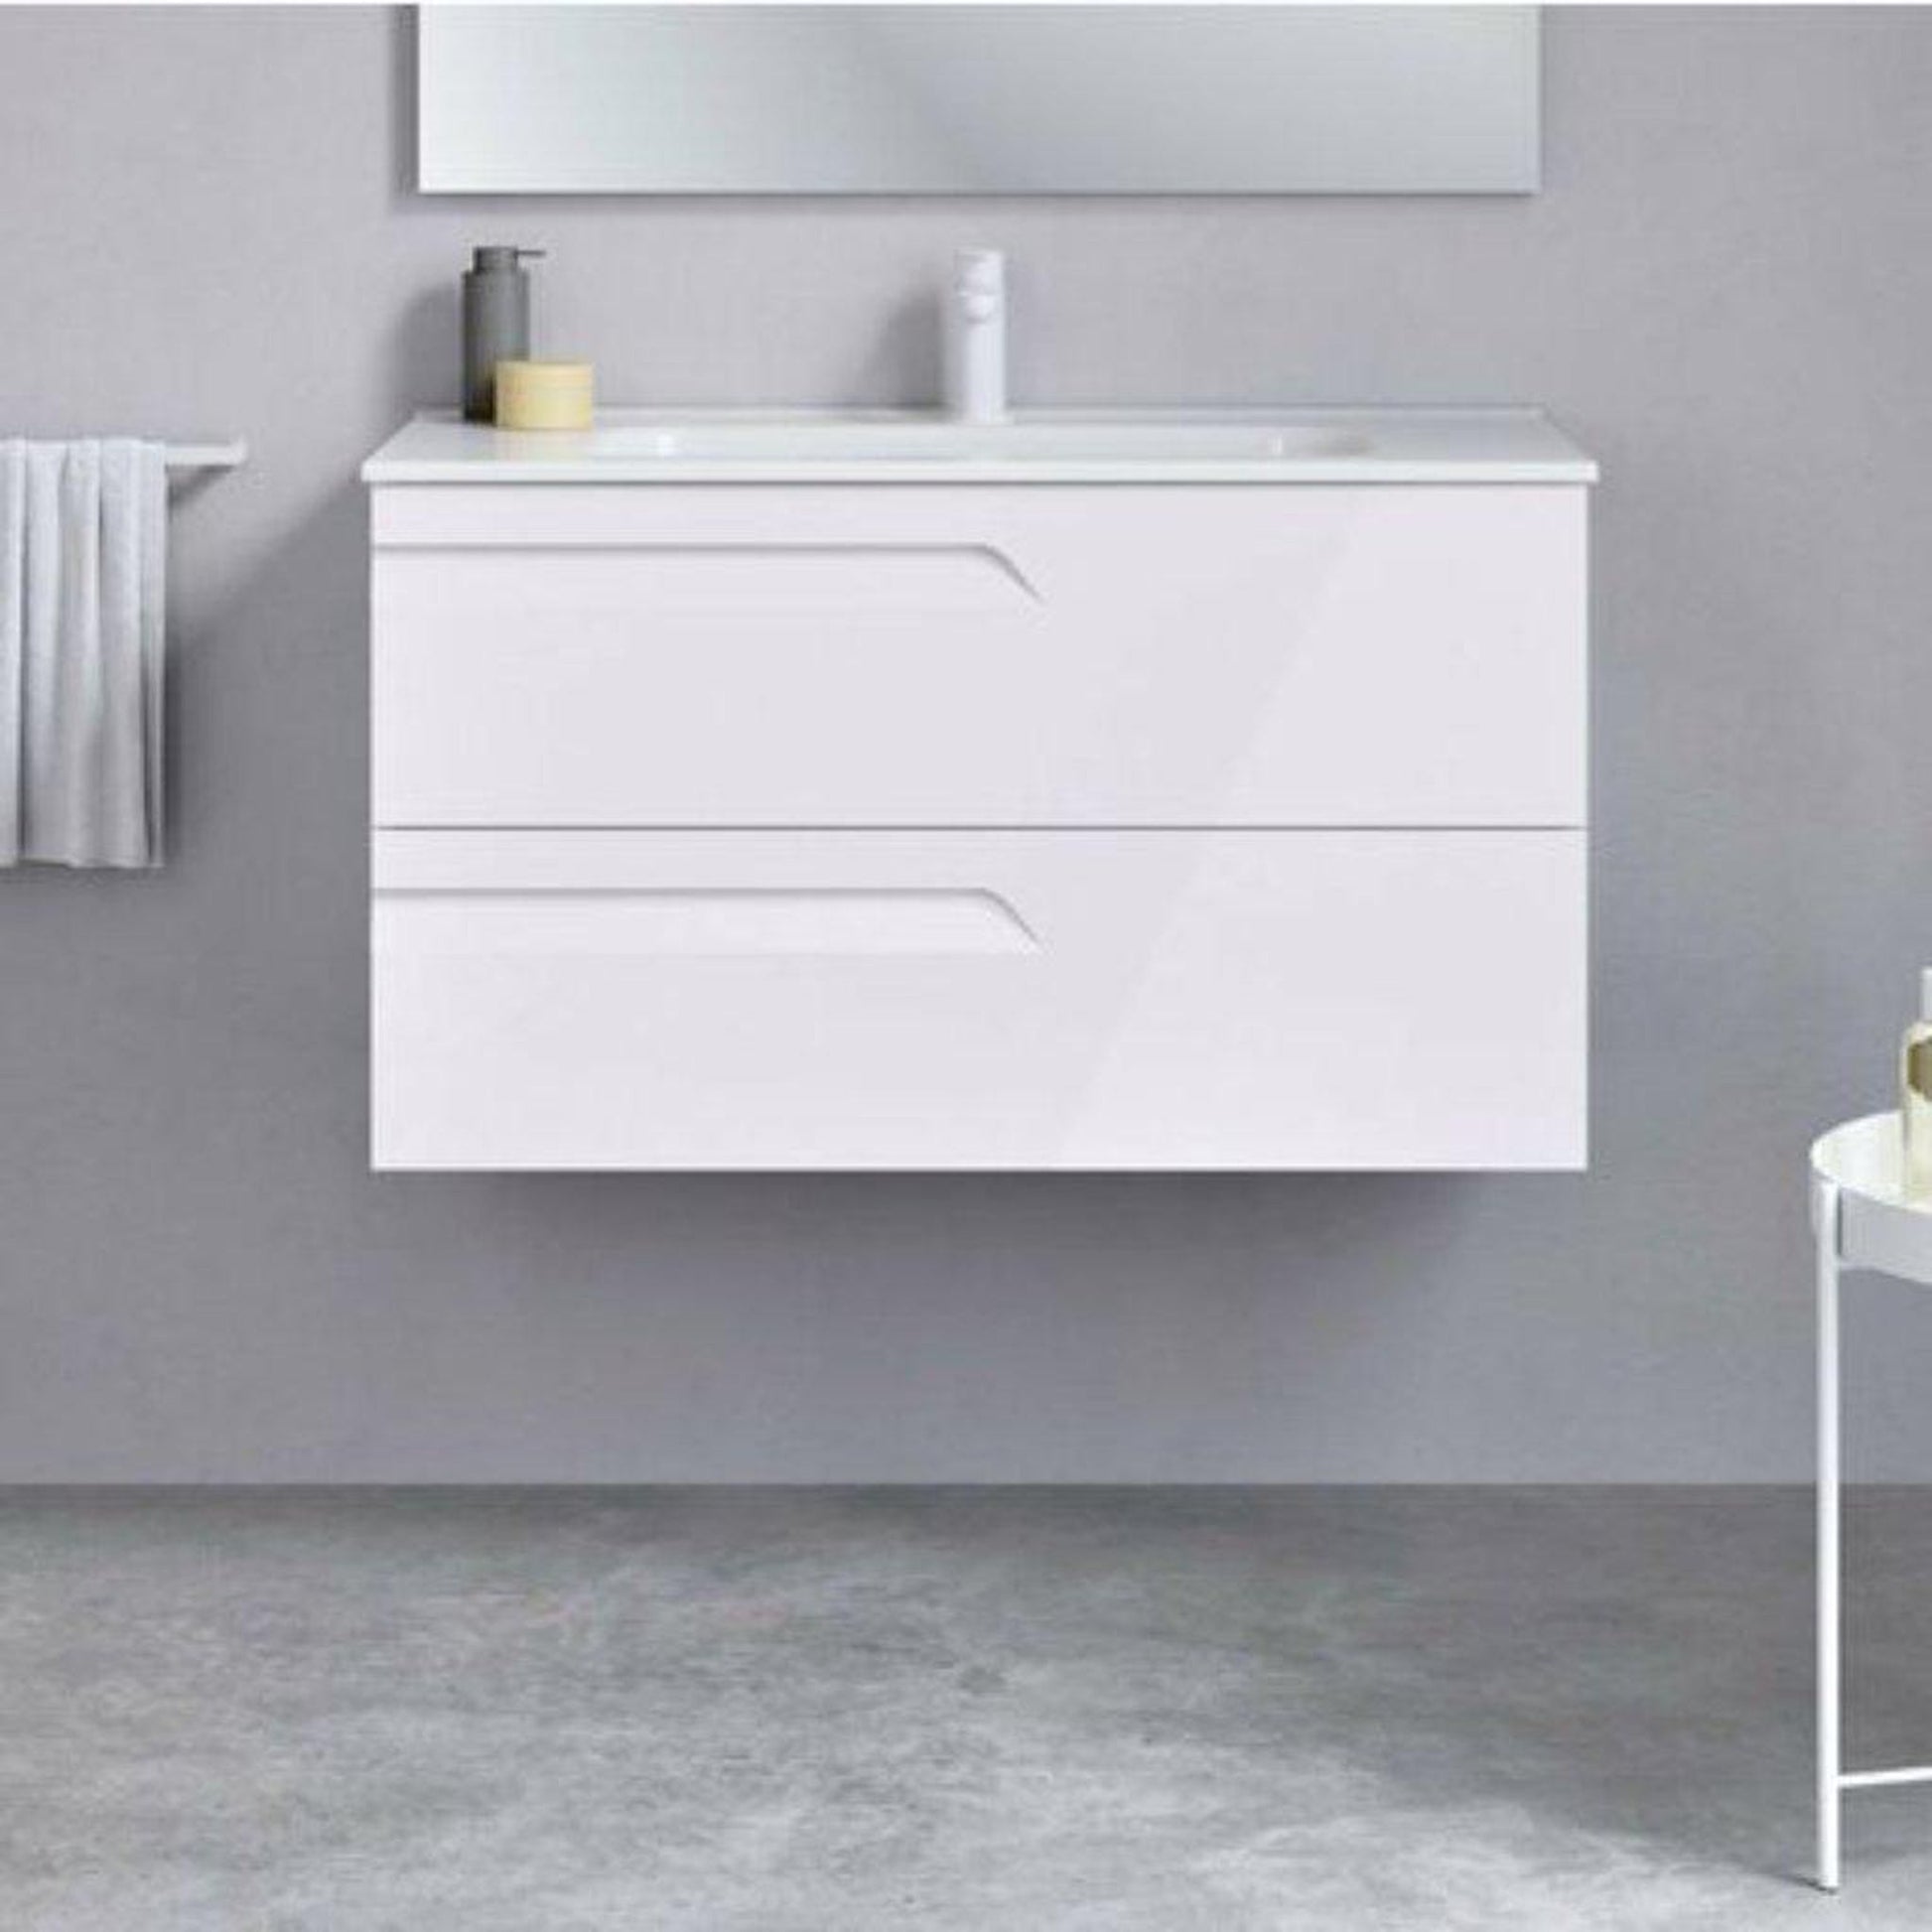 Royo Vitale 32" x 18" White Modern Wall-mounted Vanity With 2 Drawers